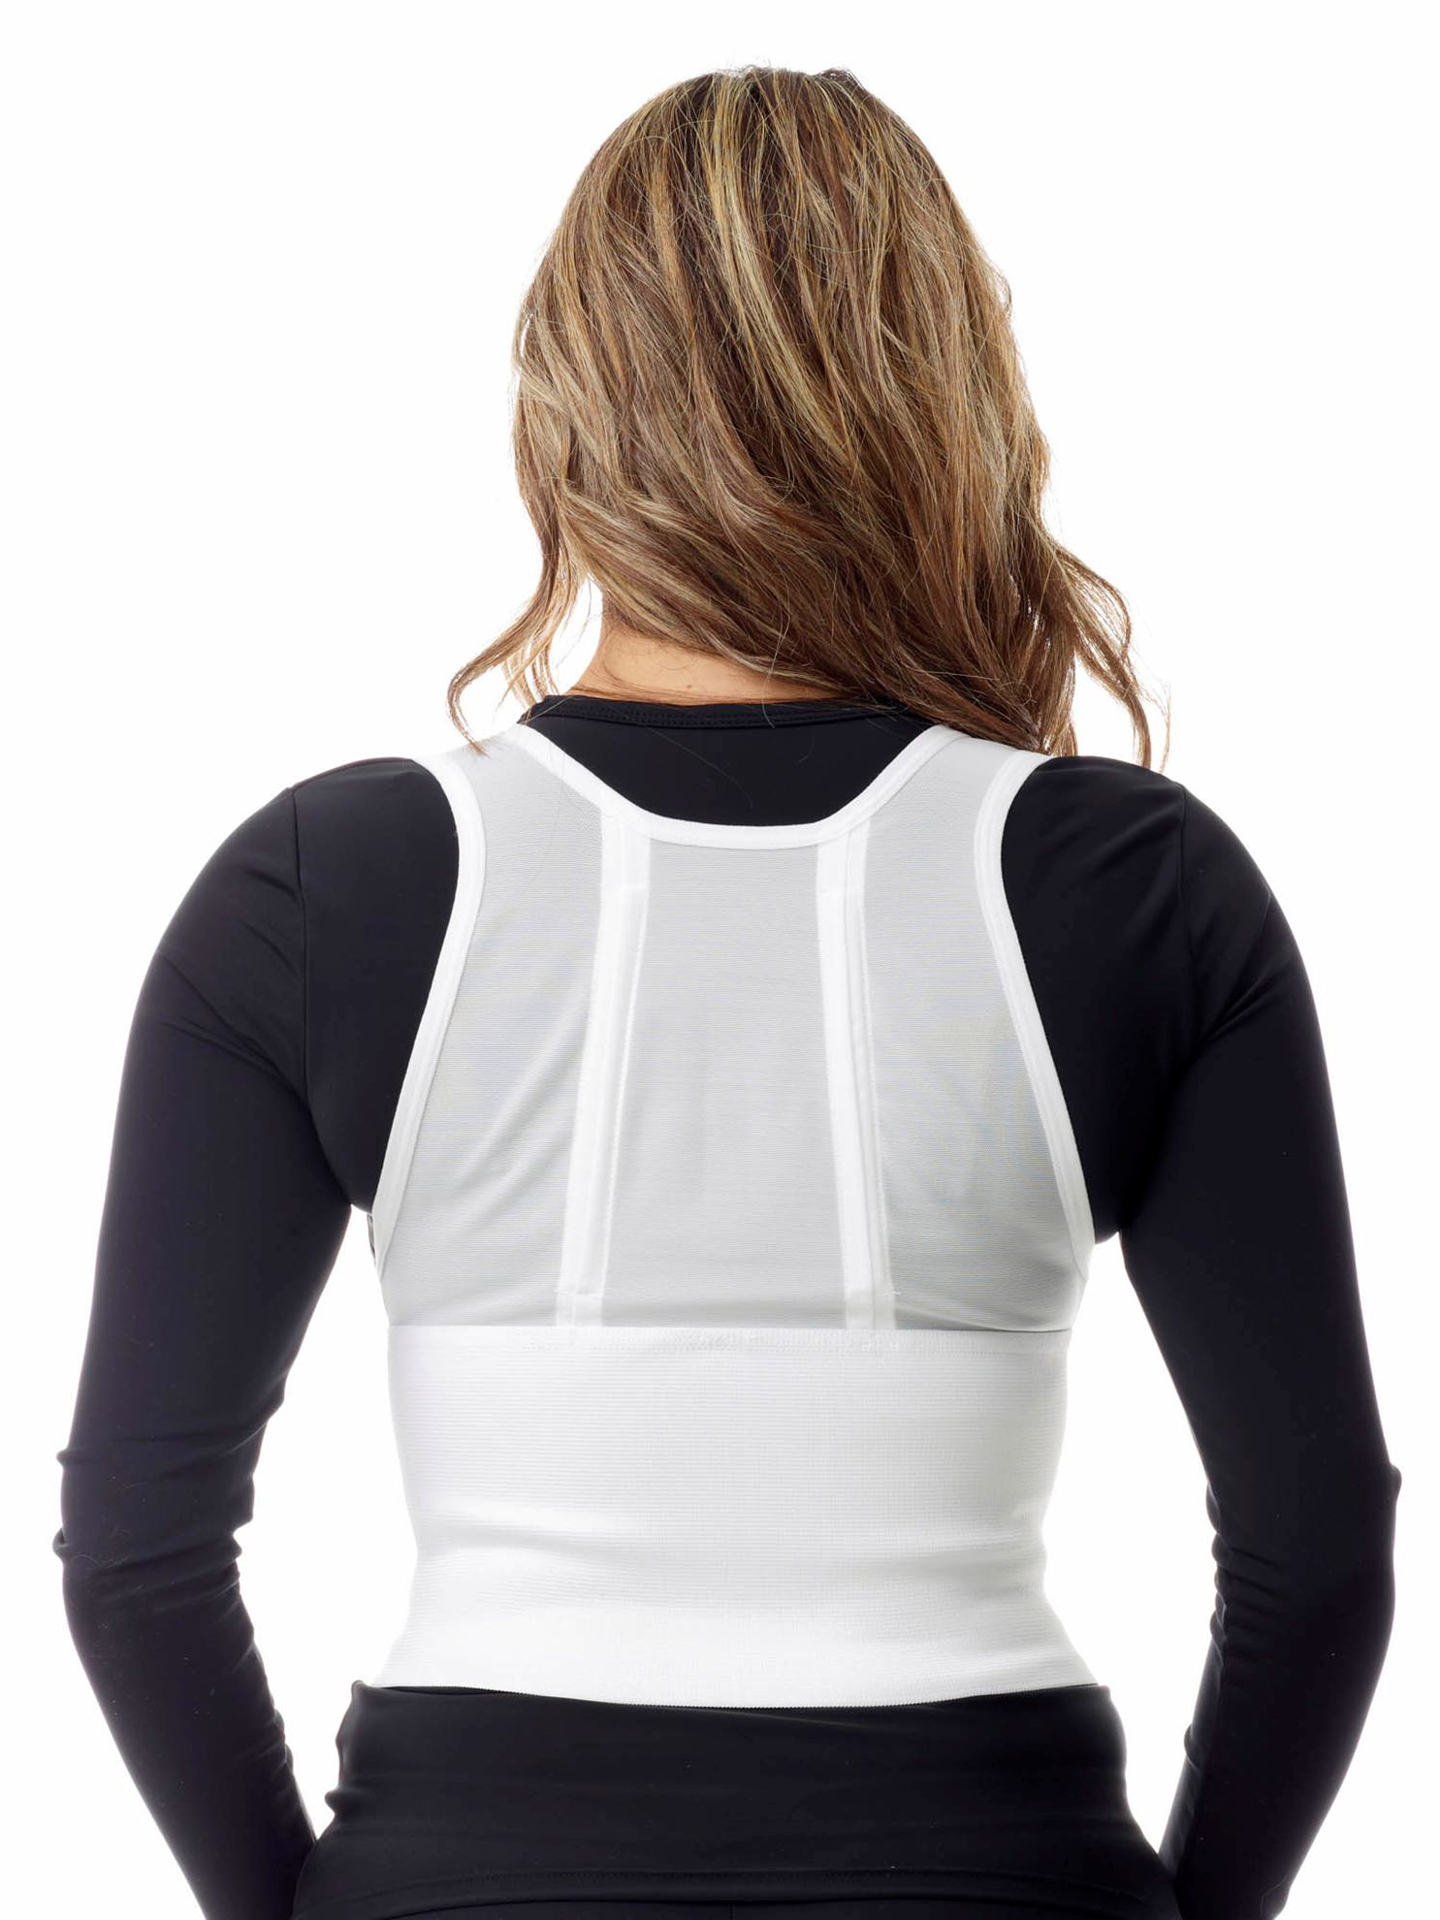 Women's Posture Corrector and Trainer. Men Compression Shirts, Girdles,  Chest Binders, Hernia Garments